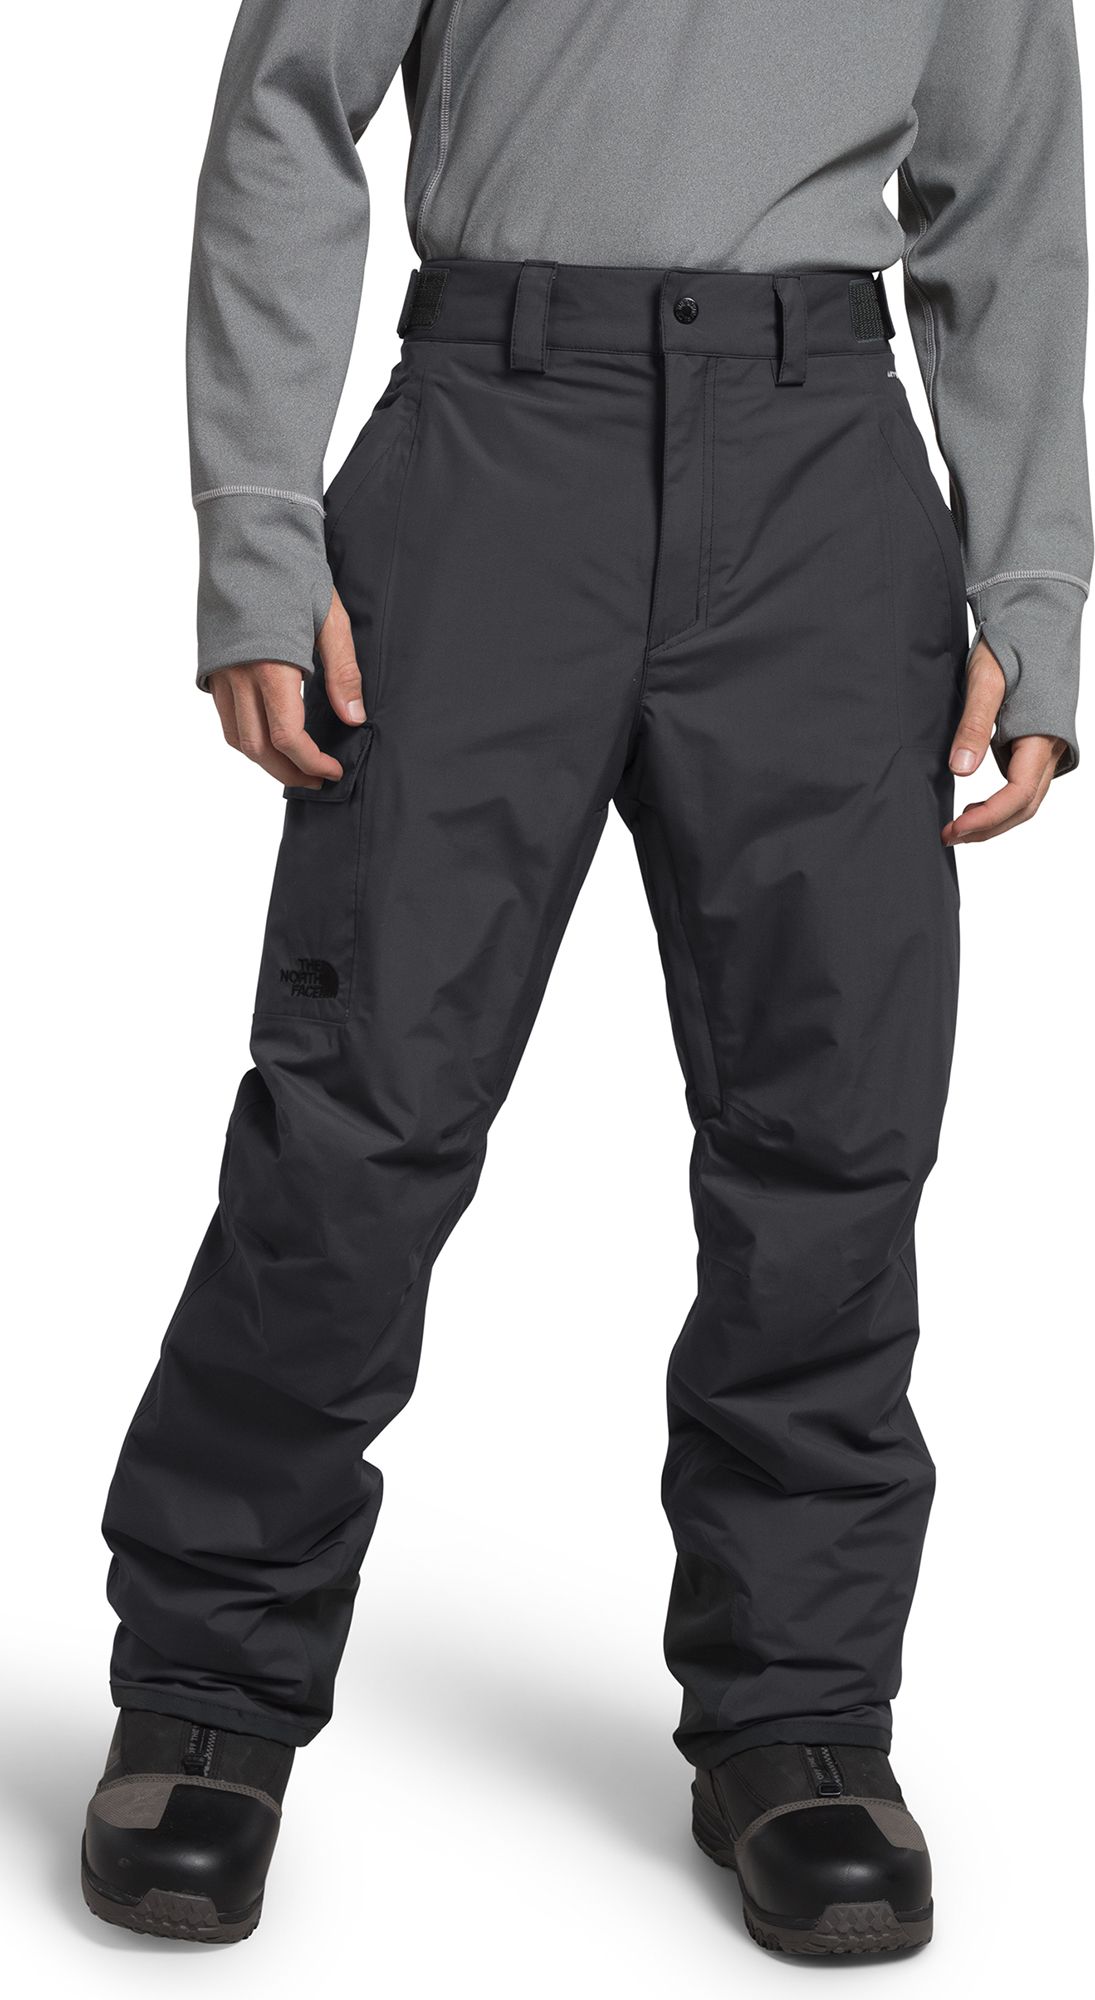 Photos - Ski Wear The North Face Men's Freedom Insulated Pants, Small, Asphalt Grey 21TNOMMF 